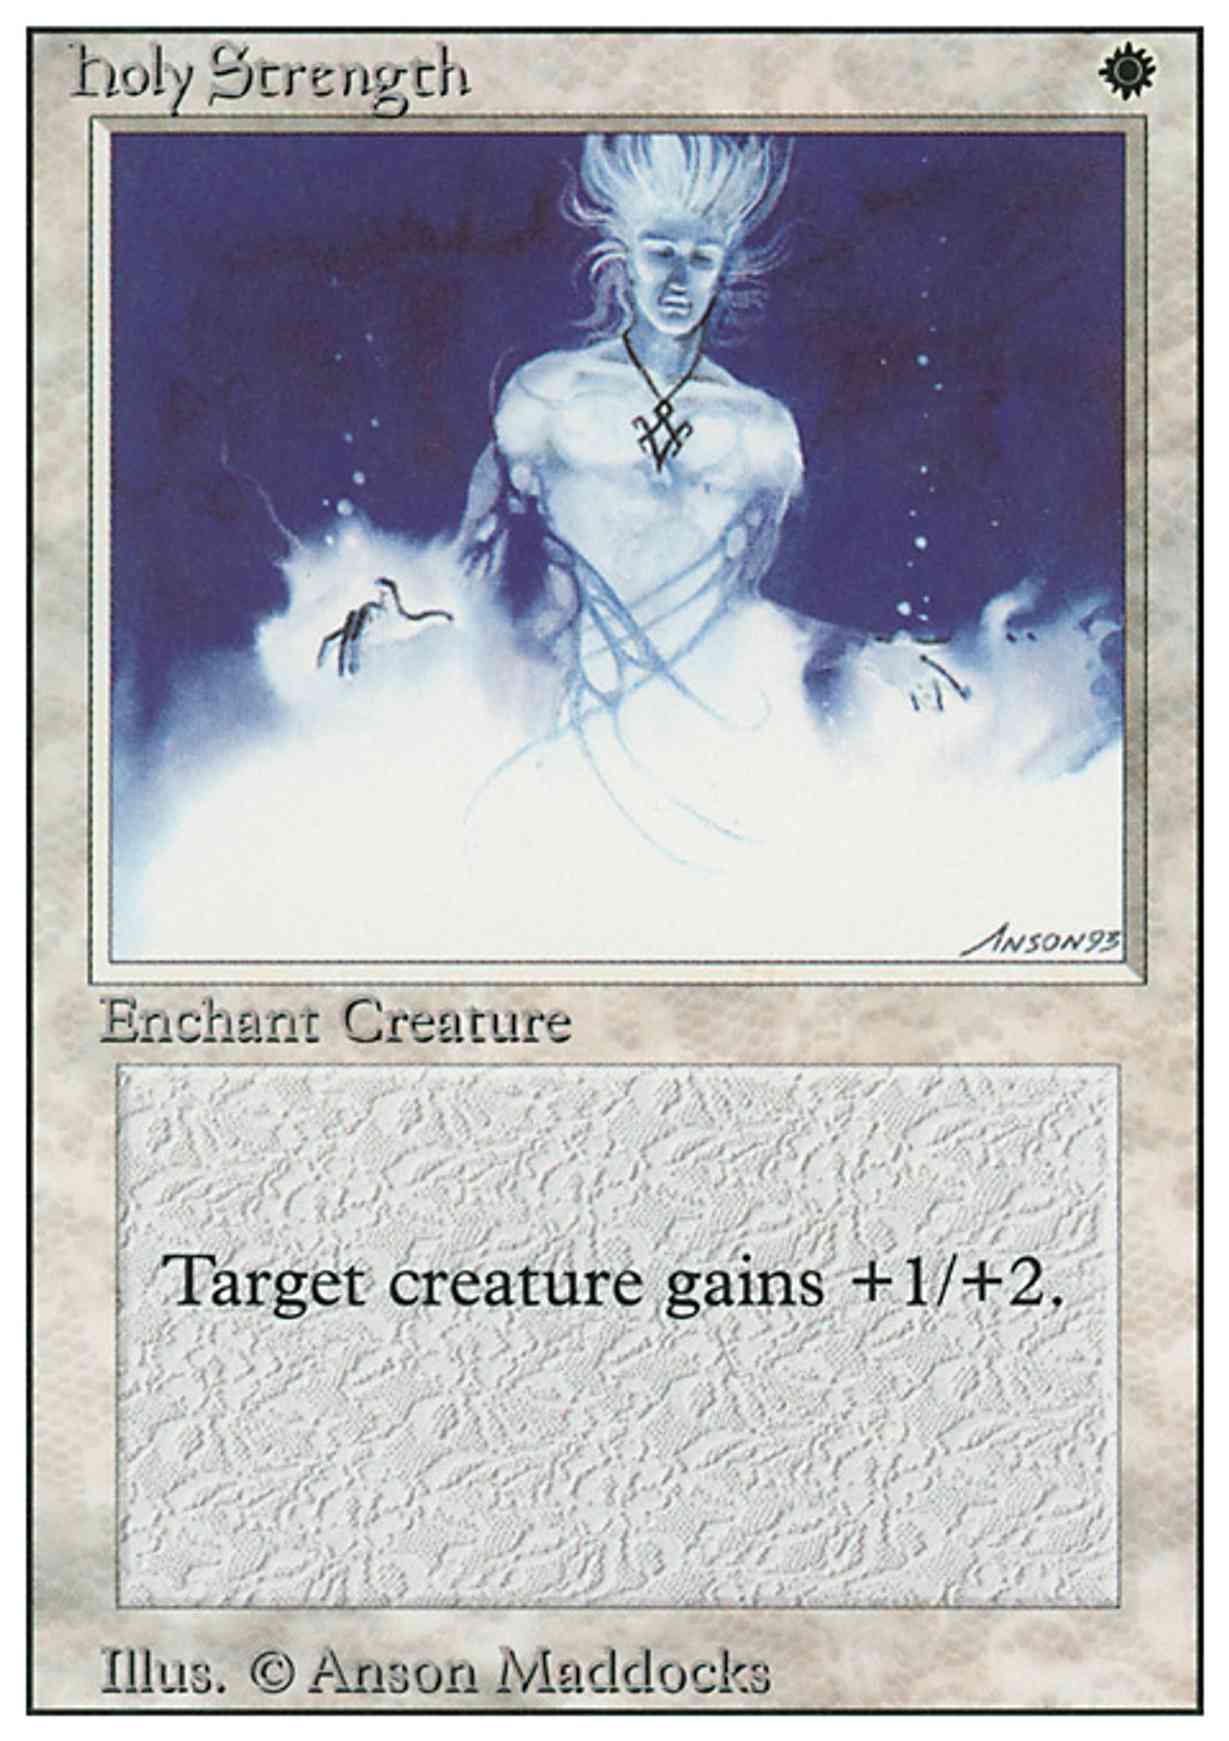 Holy Strength magic card front